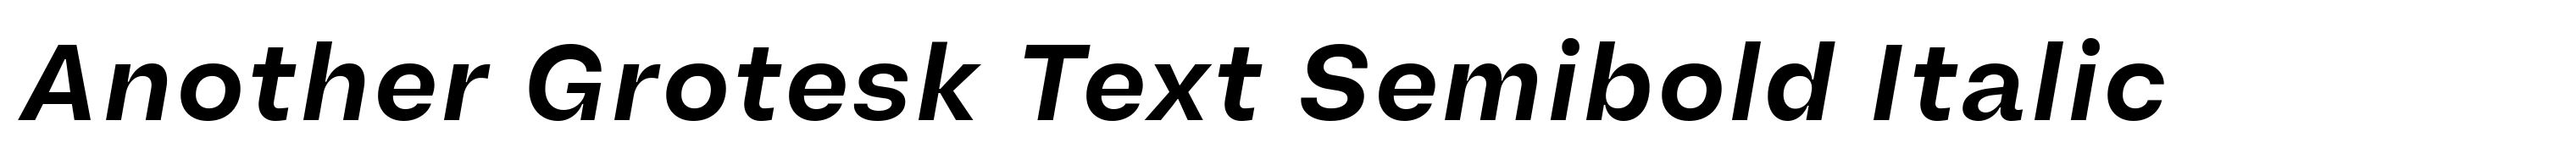 Another Grotesk Text Semibold Italic